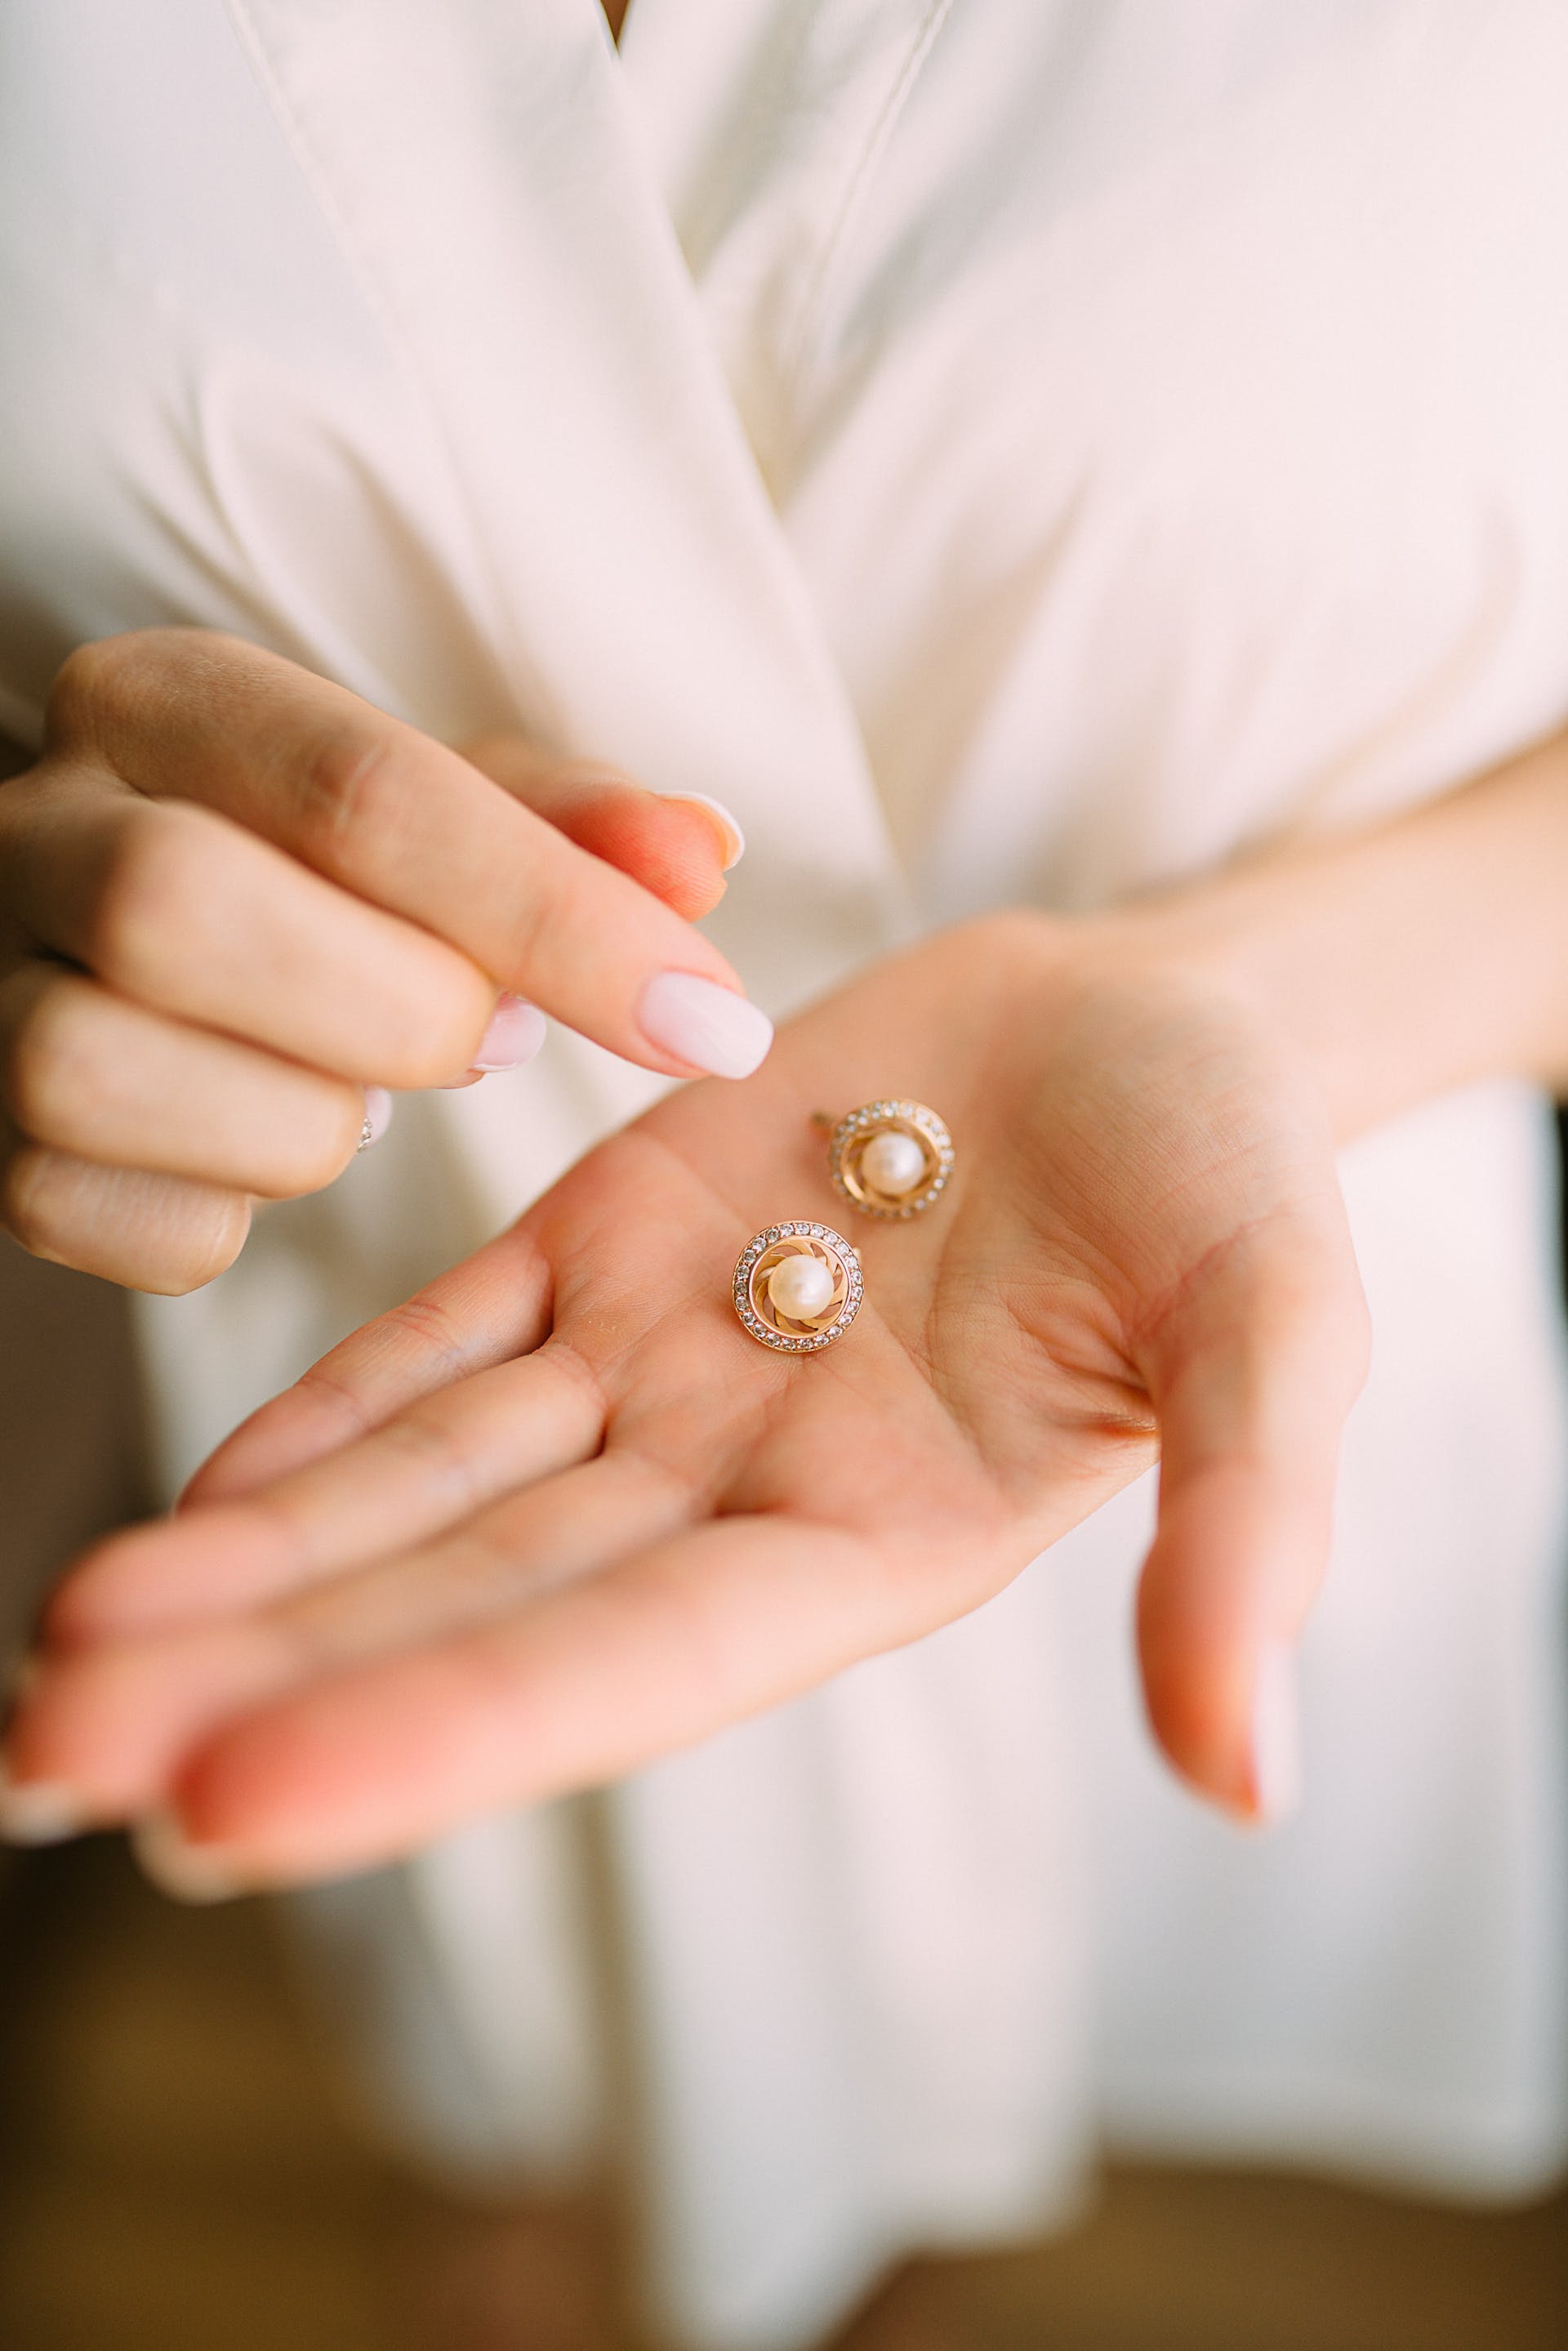 Woman holding a pair of earrings | Source: Pexels